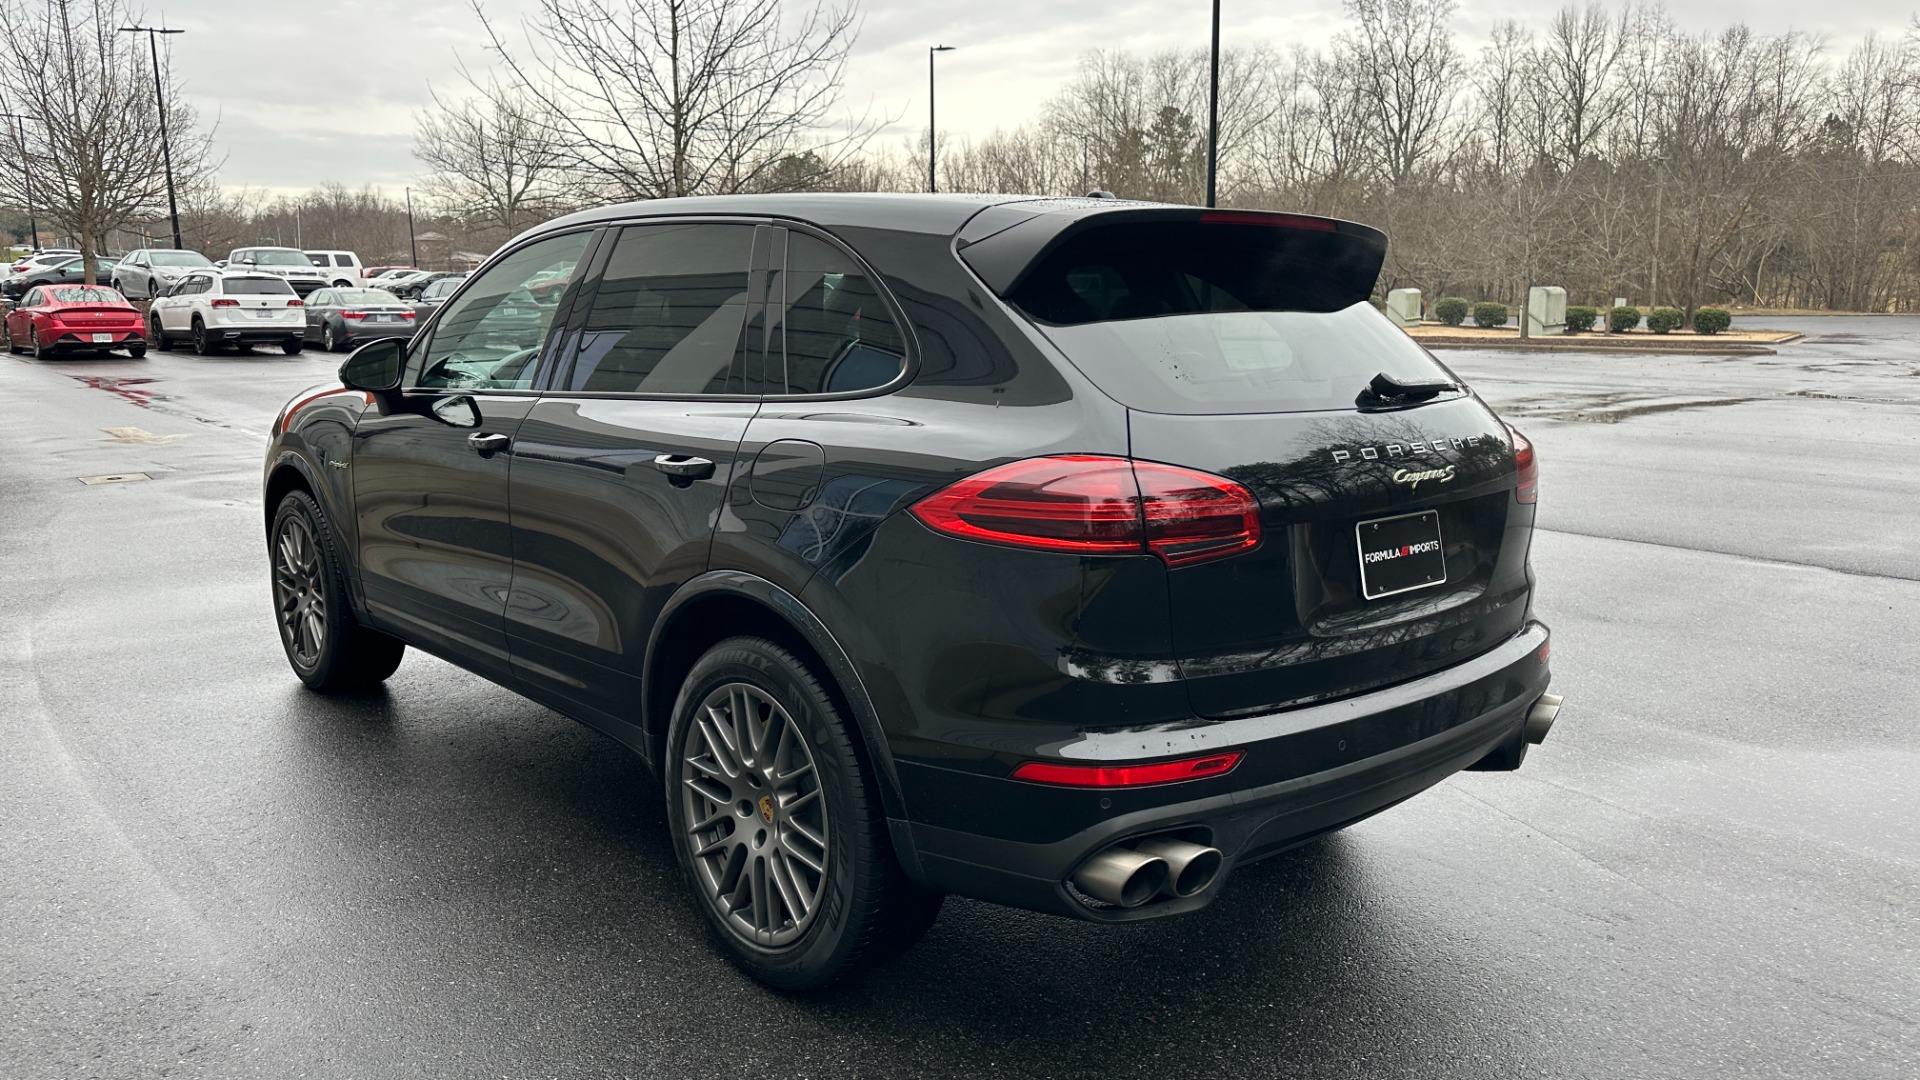 Used 2017 Porsche Cayenne S E-Hybrid PLATINUM / PREMIUM PLUS / SAFETY ASSIST for sale Sold at Formula Imports in Charlotte NC 28227 7